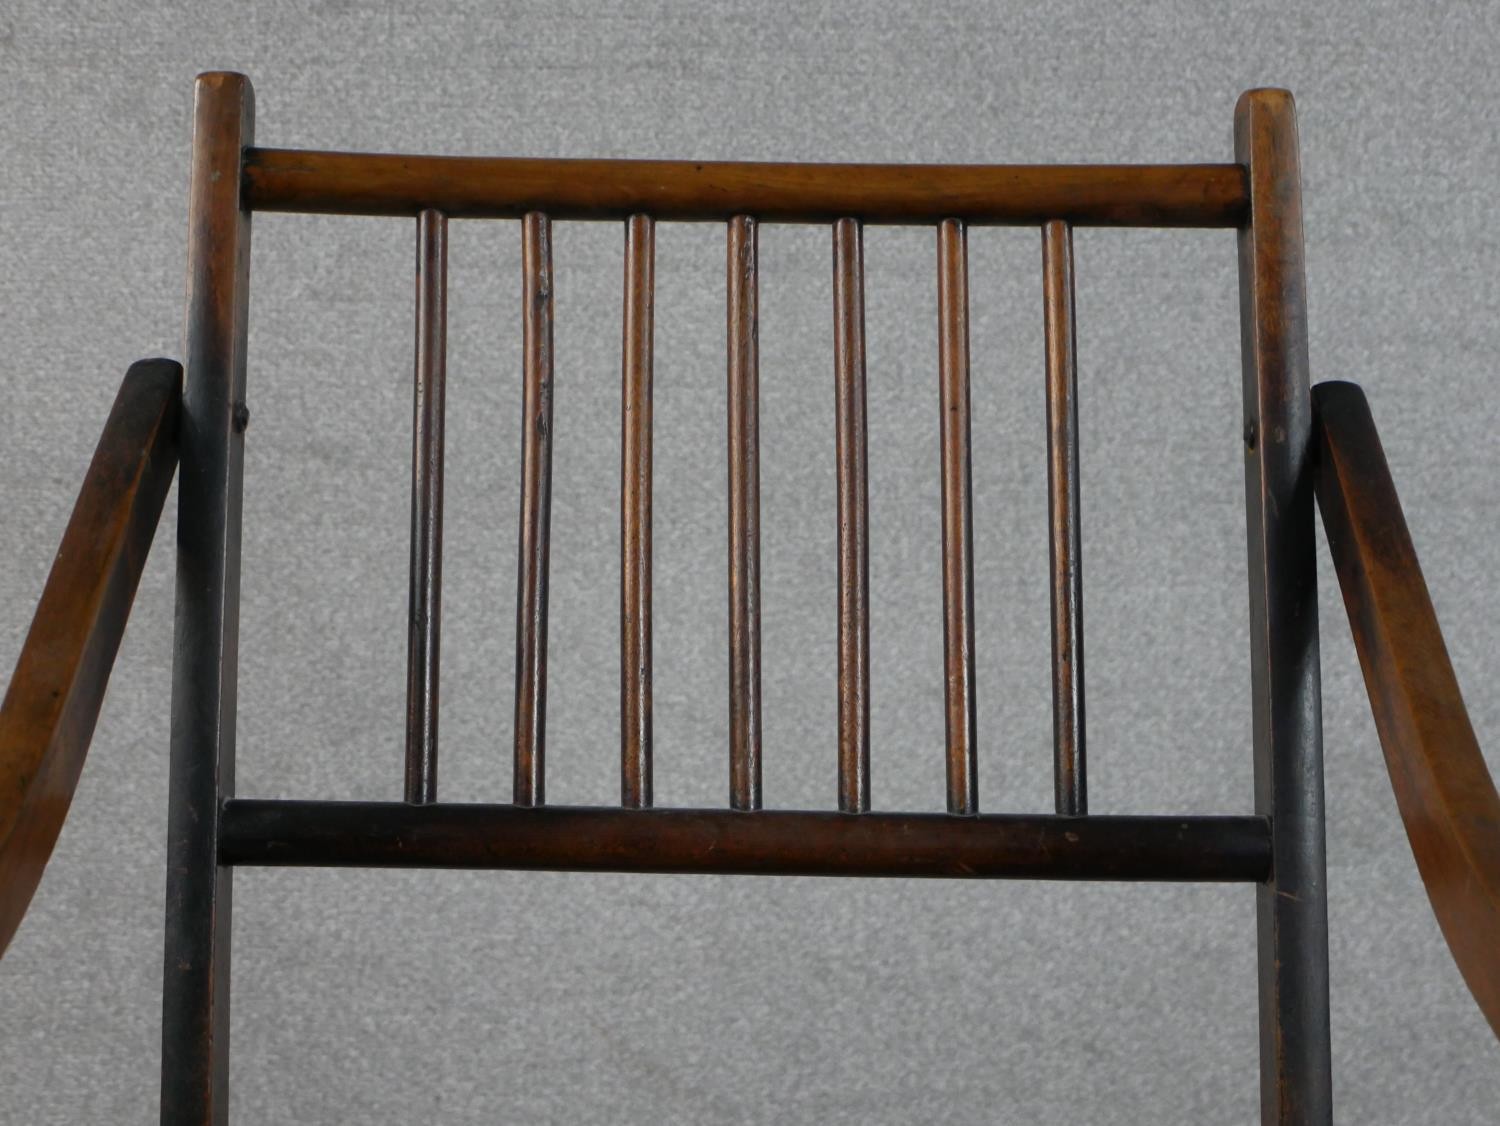 An early 20th century fruitwood folding armchair, with a spindle back, the seat upholstered in a - Image 5 of 6